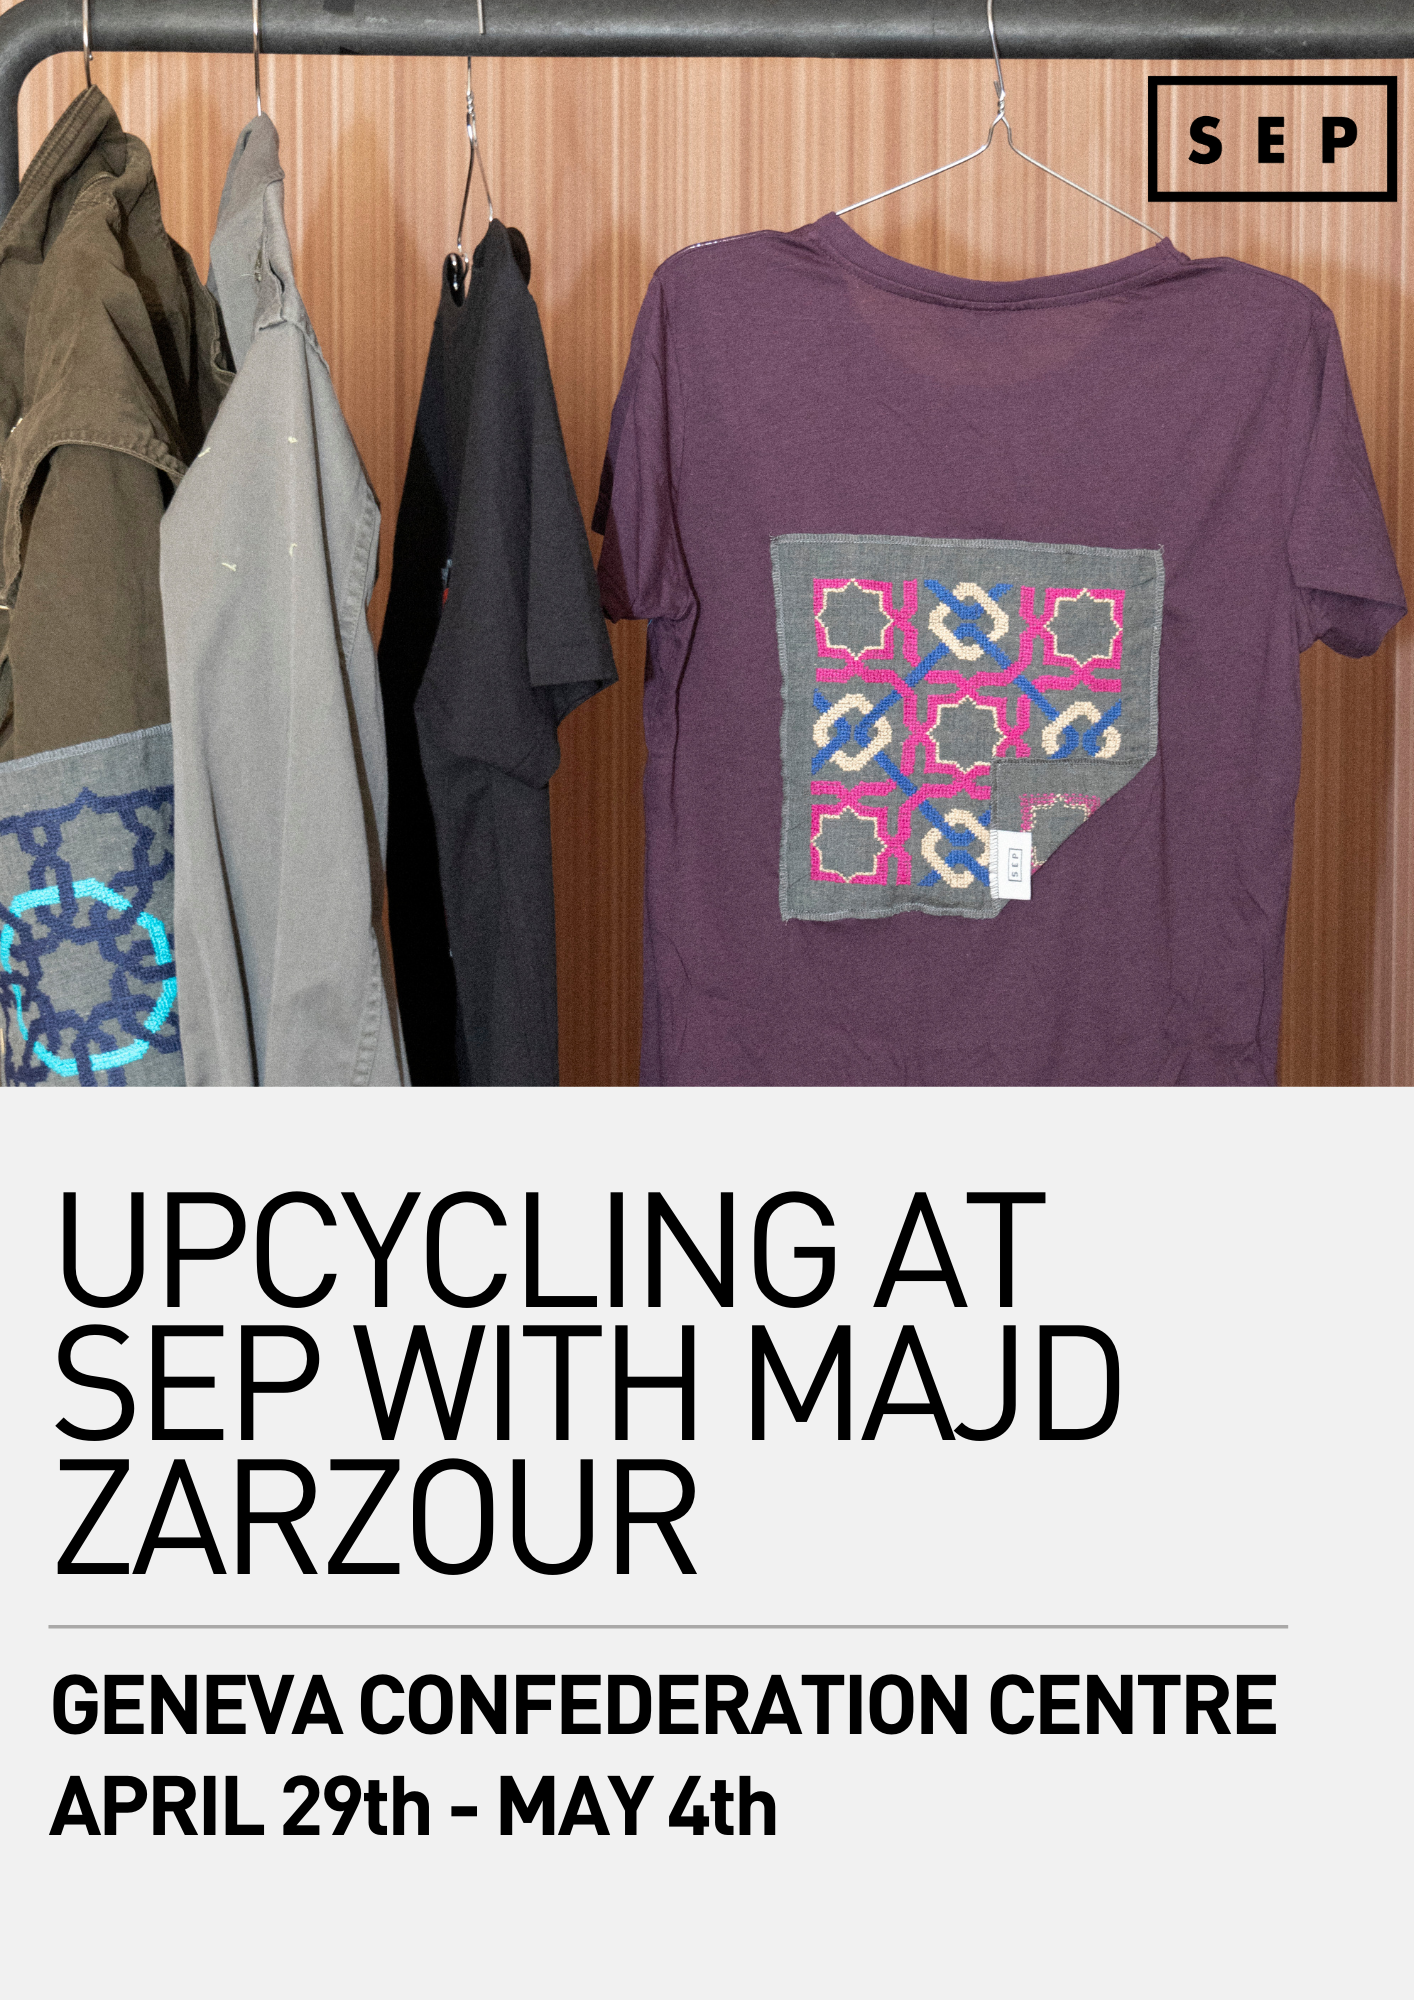 SEP upcycling week in confederation centre